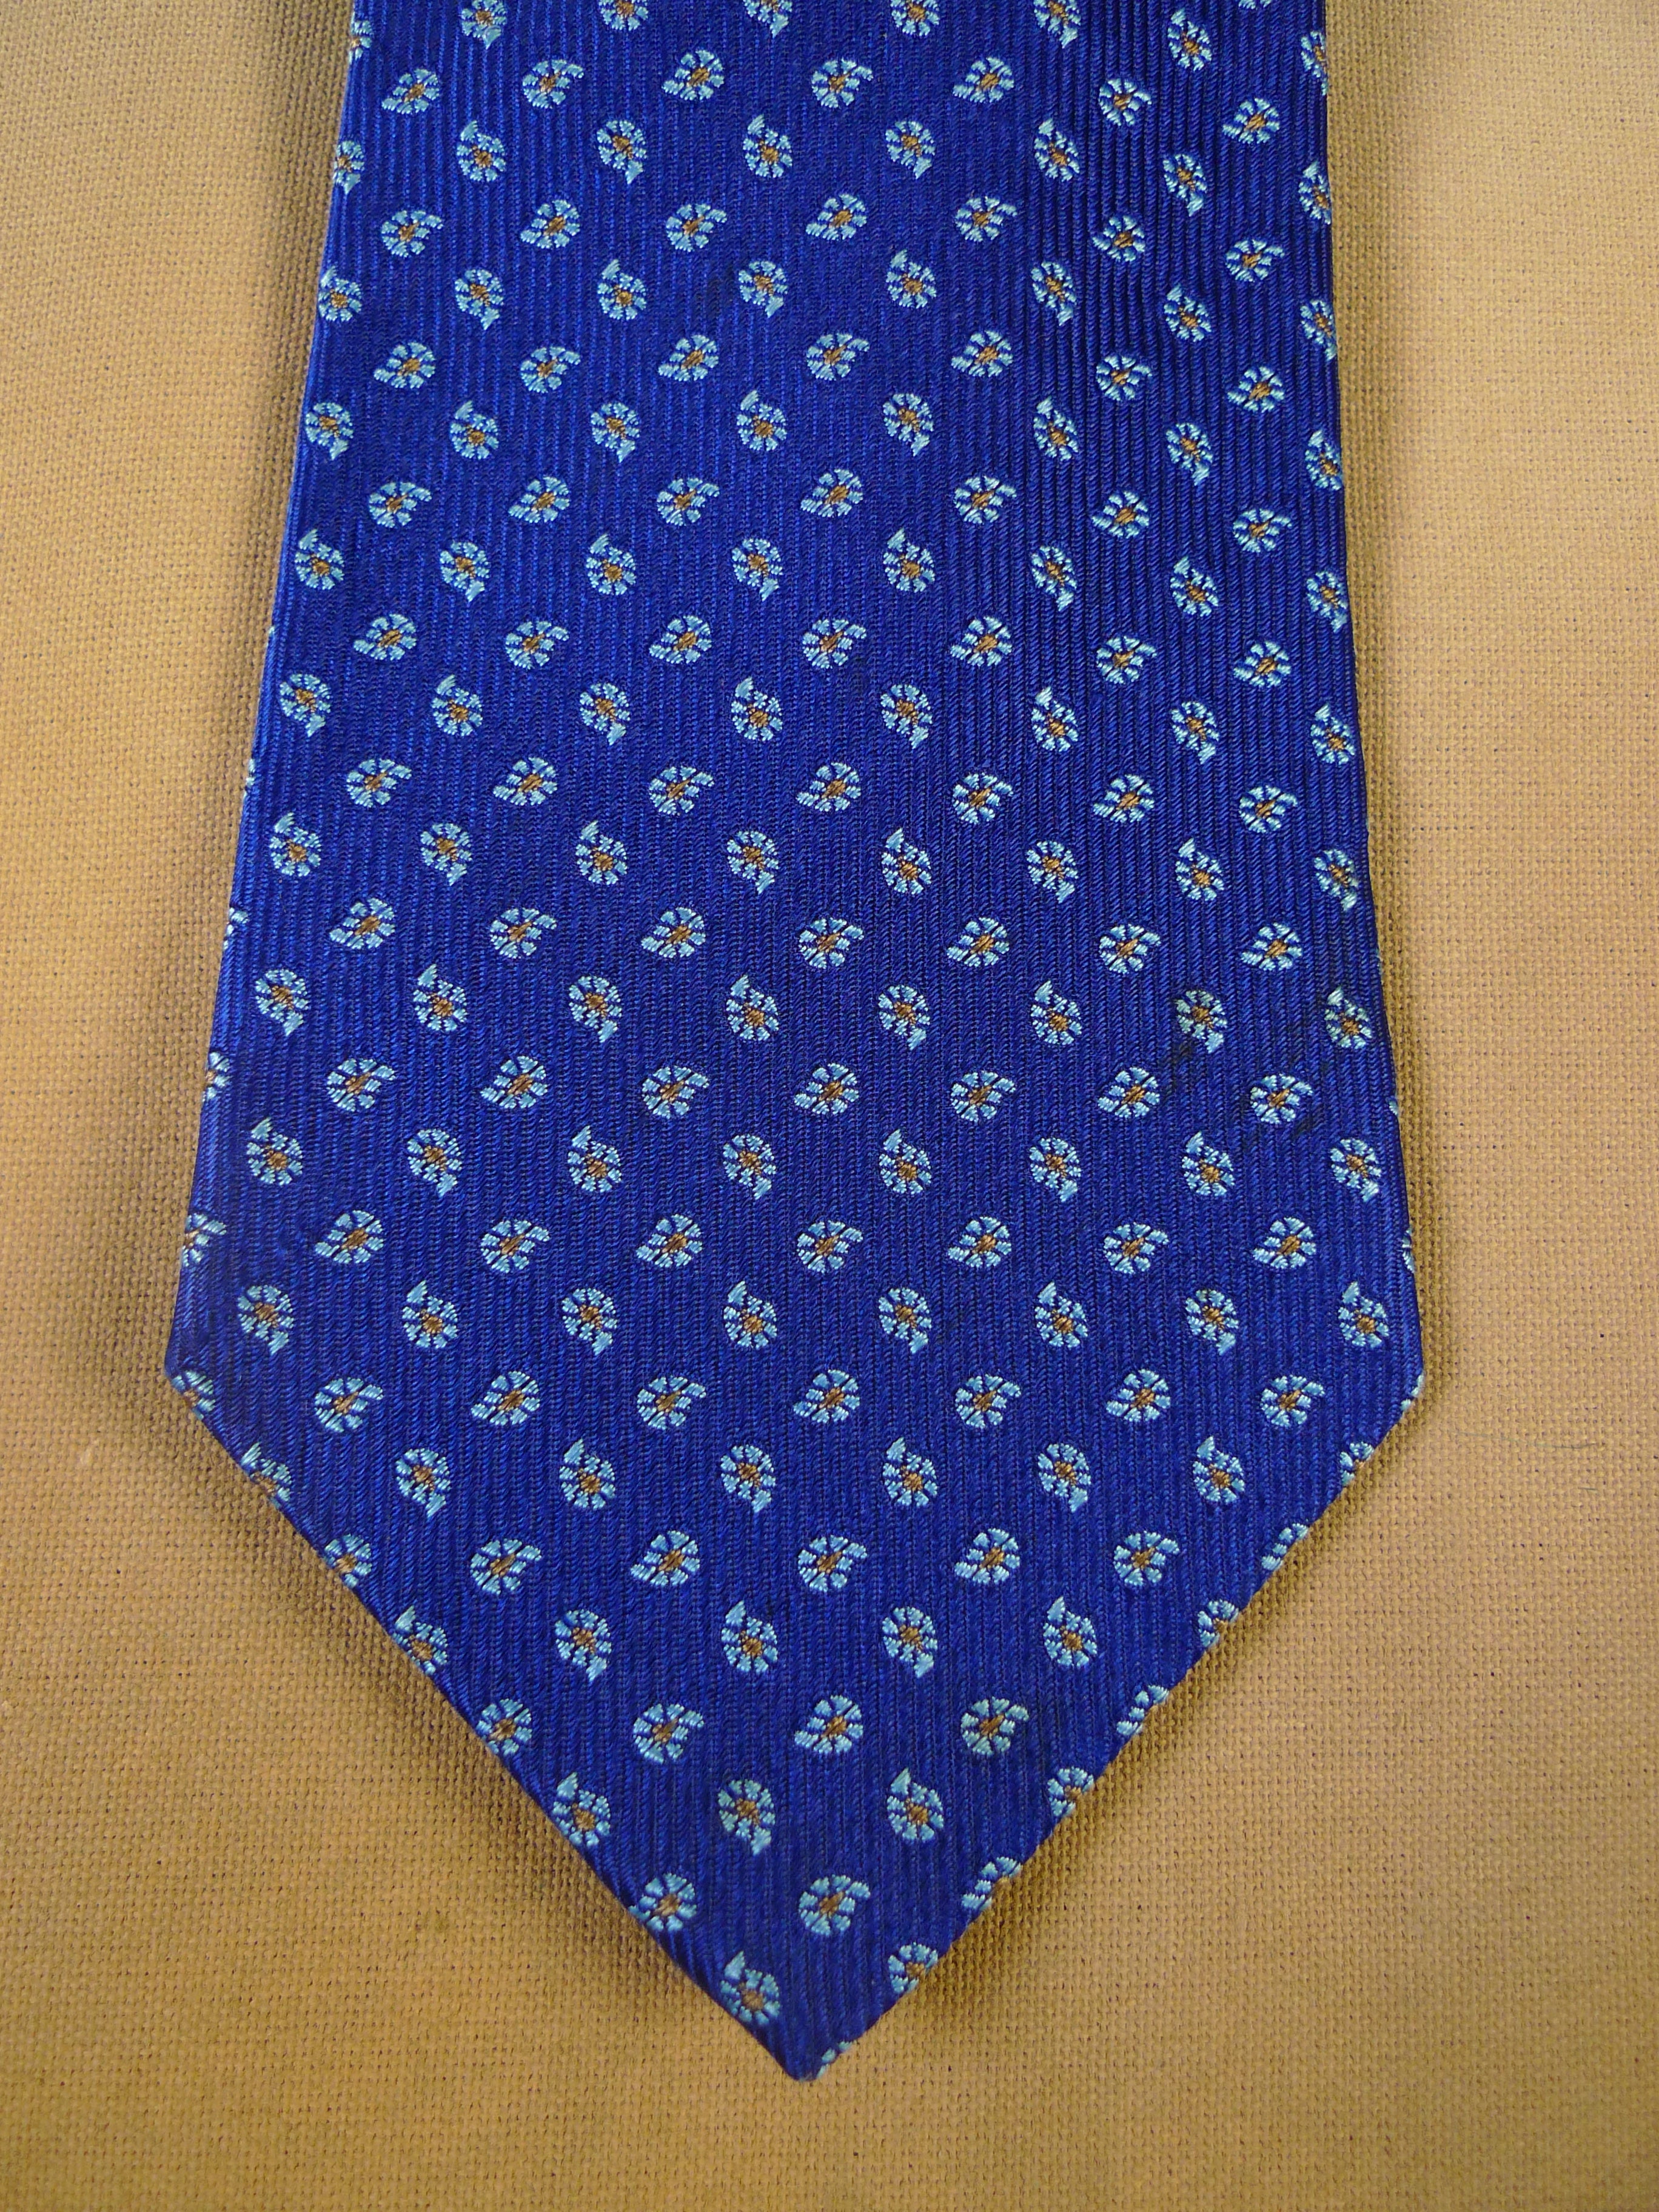 24/0111 immaculate turnbull & asser blue paisley pattern 100% silk tie